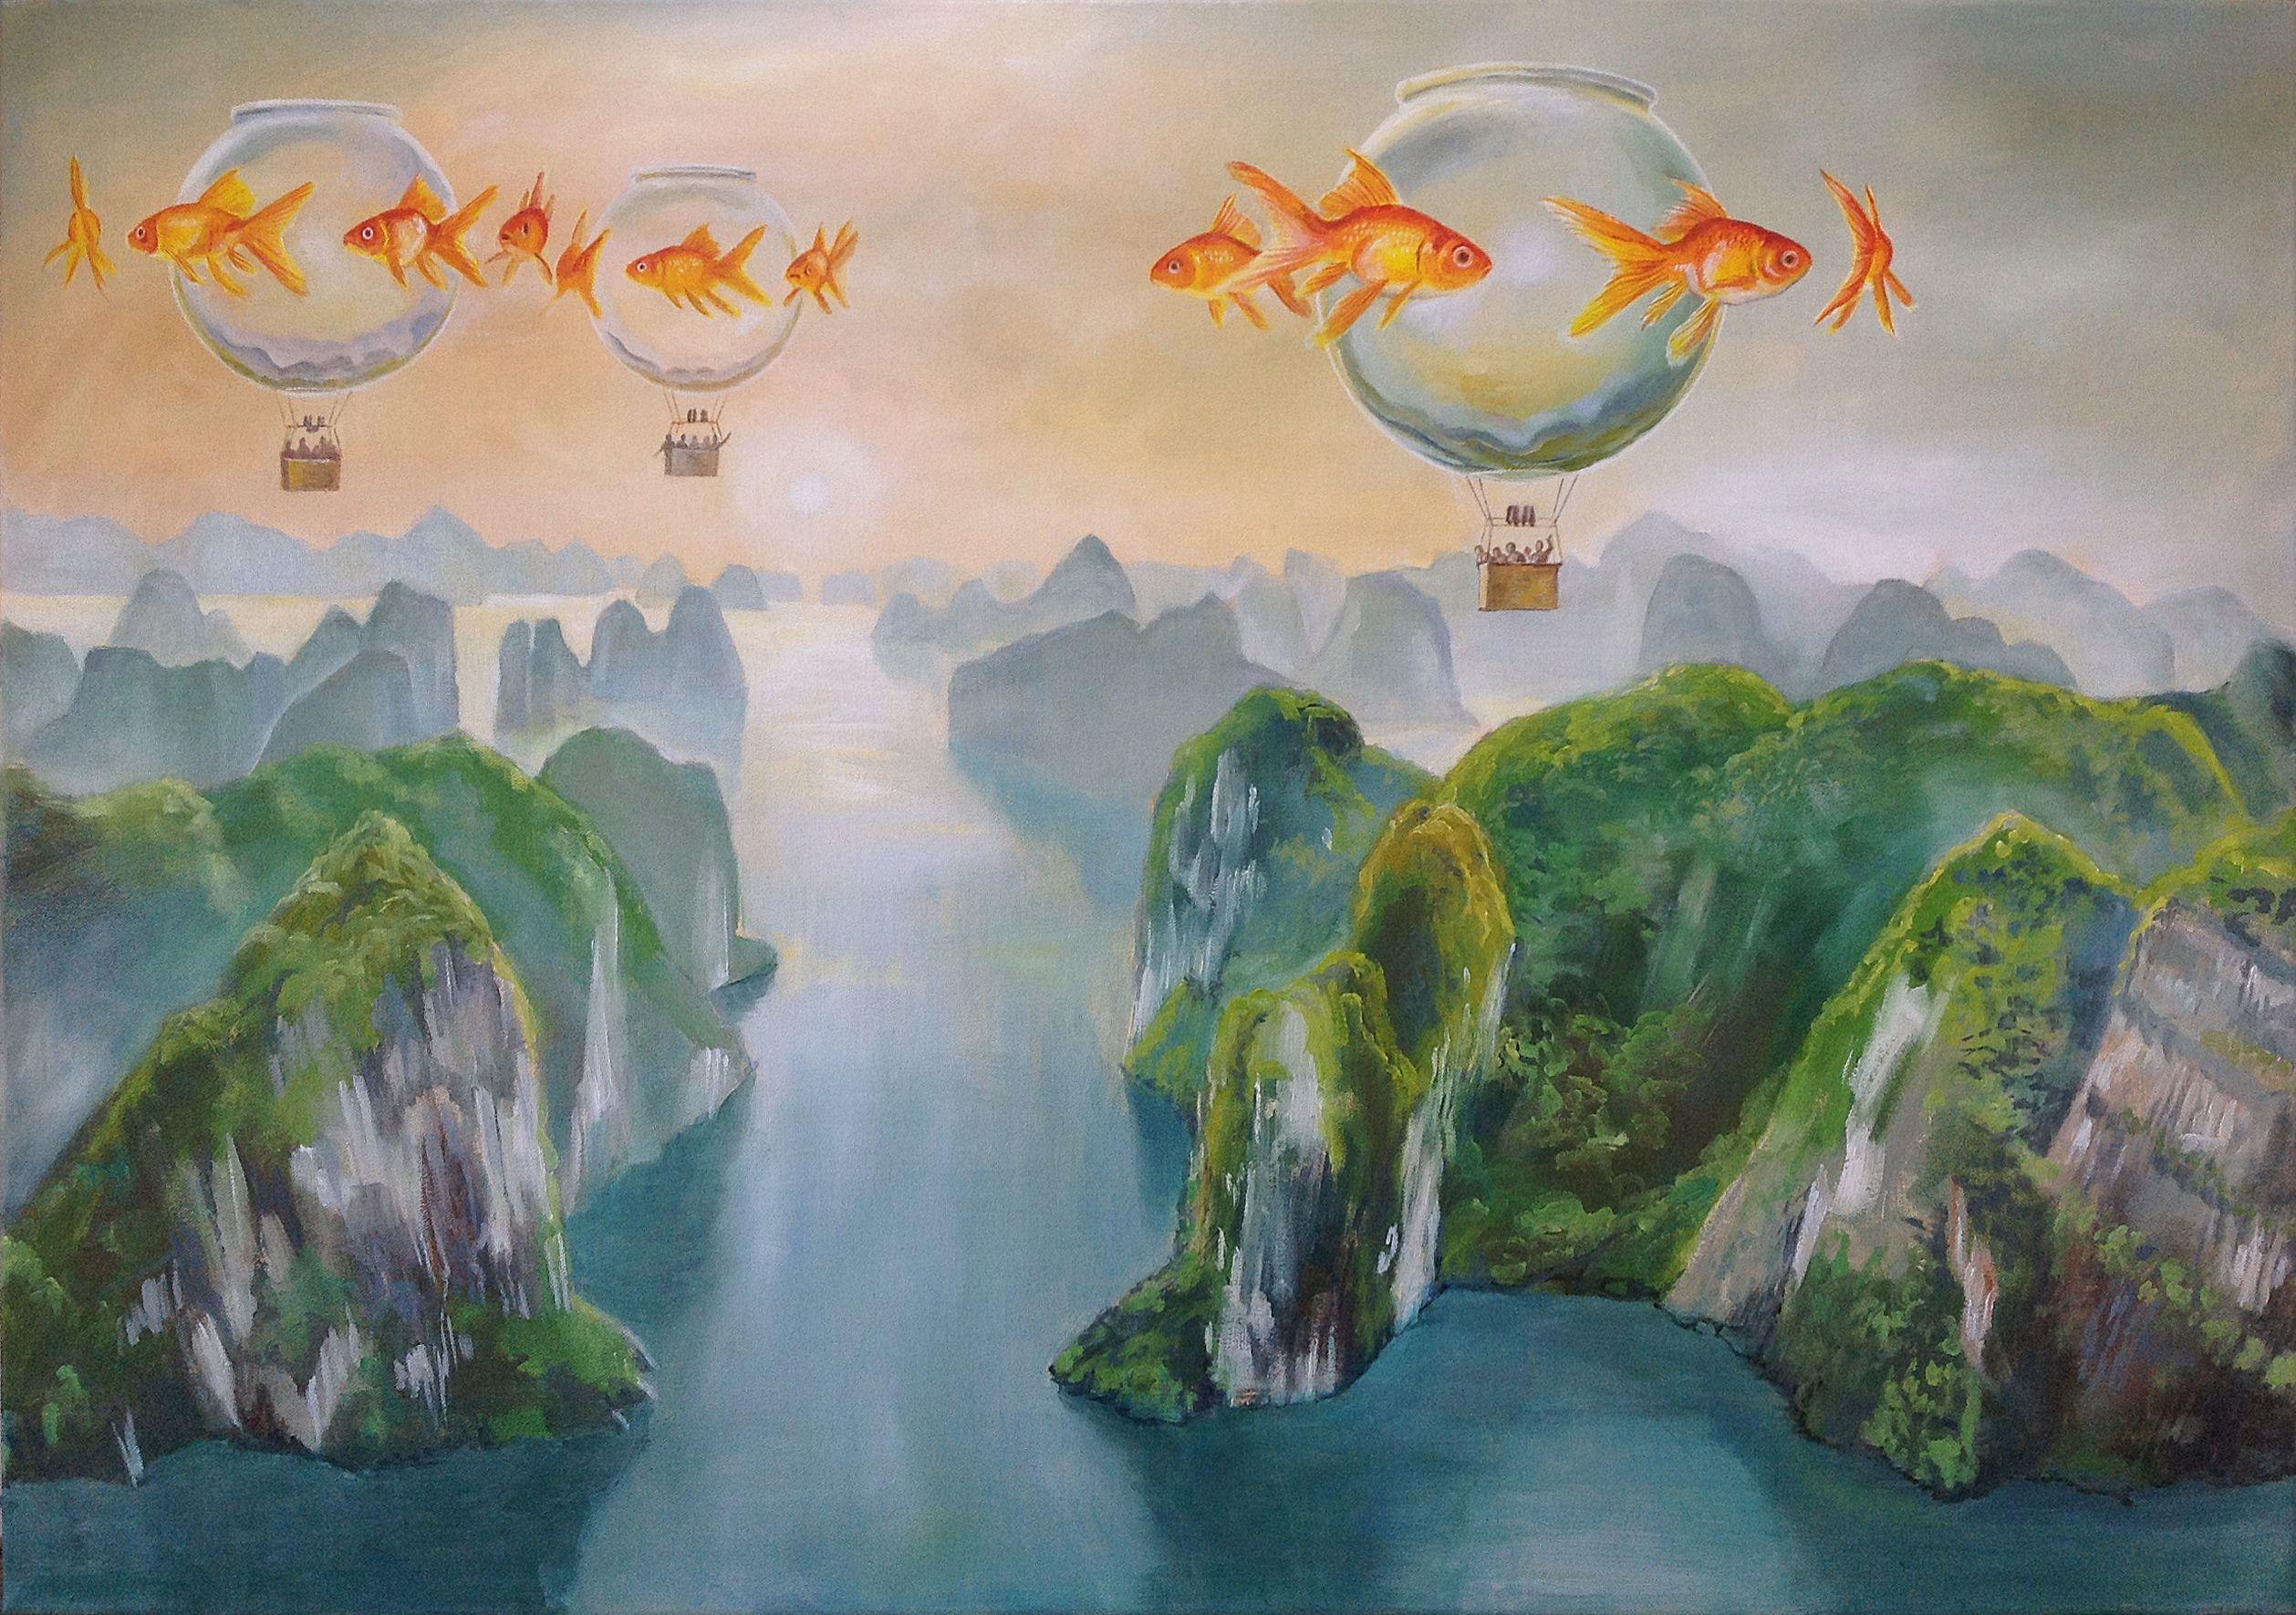 A continuation of my Goldfish paintings. Here two surreal balloons float over a mountainous landscape, I've tried to capture lightness and air in the atmosphere.  The Goldfish bowl always symbolises a fragile ecosystem in my personal iconography.   